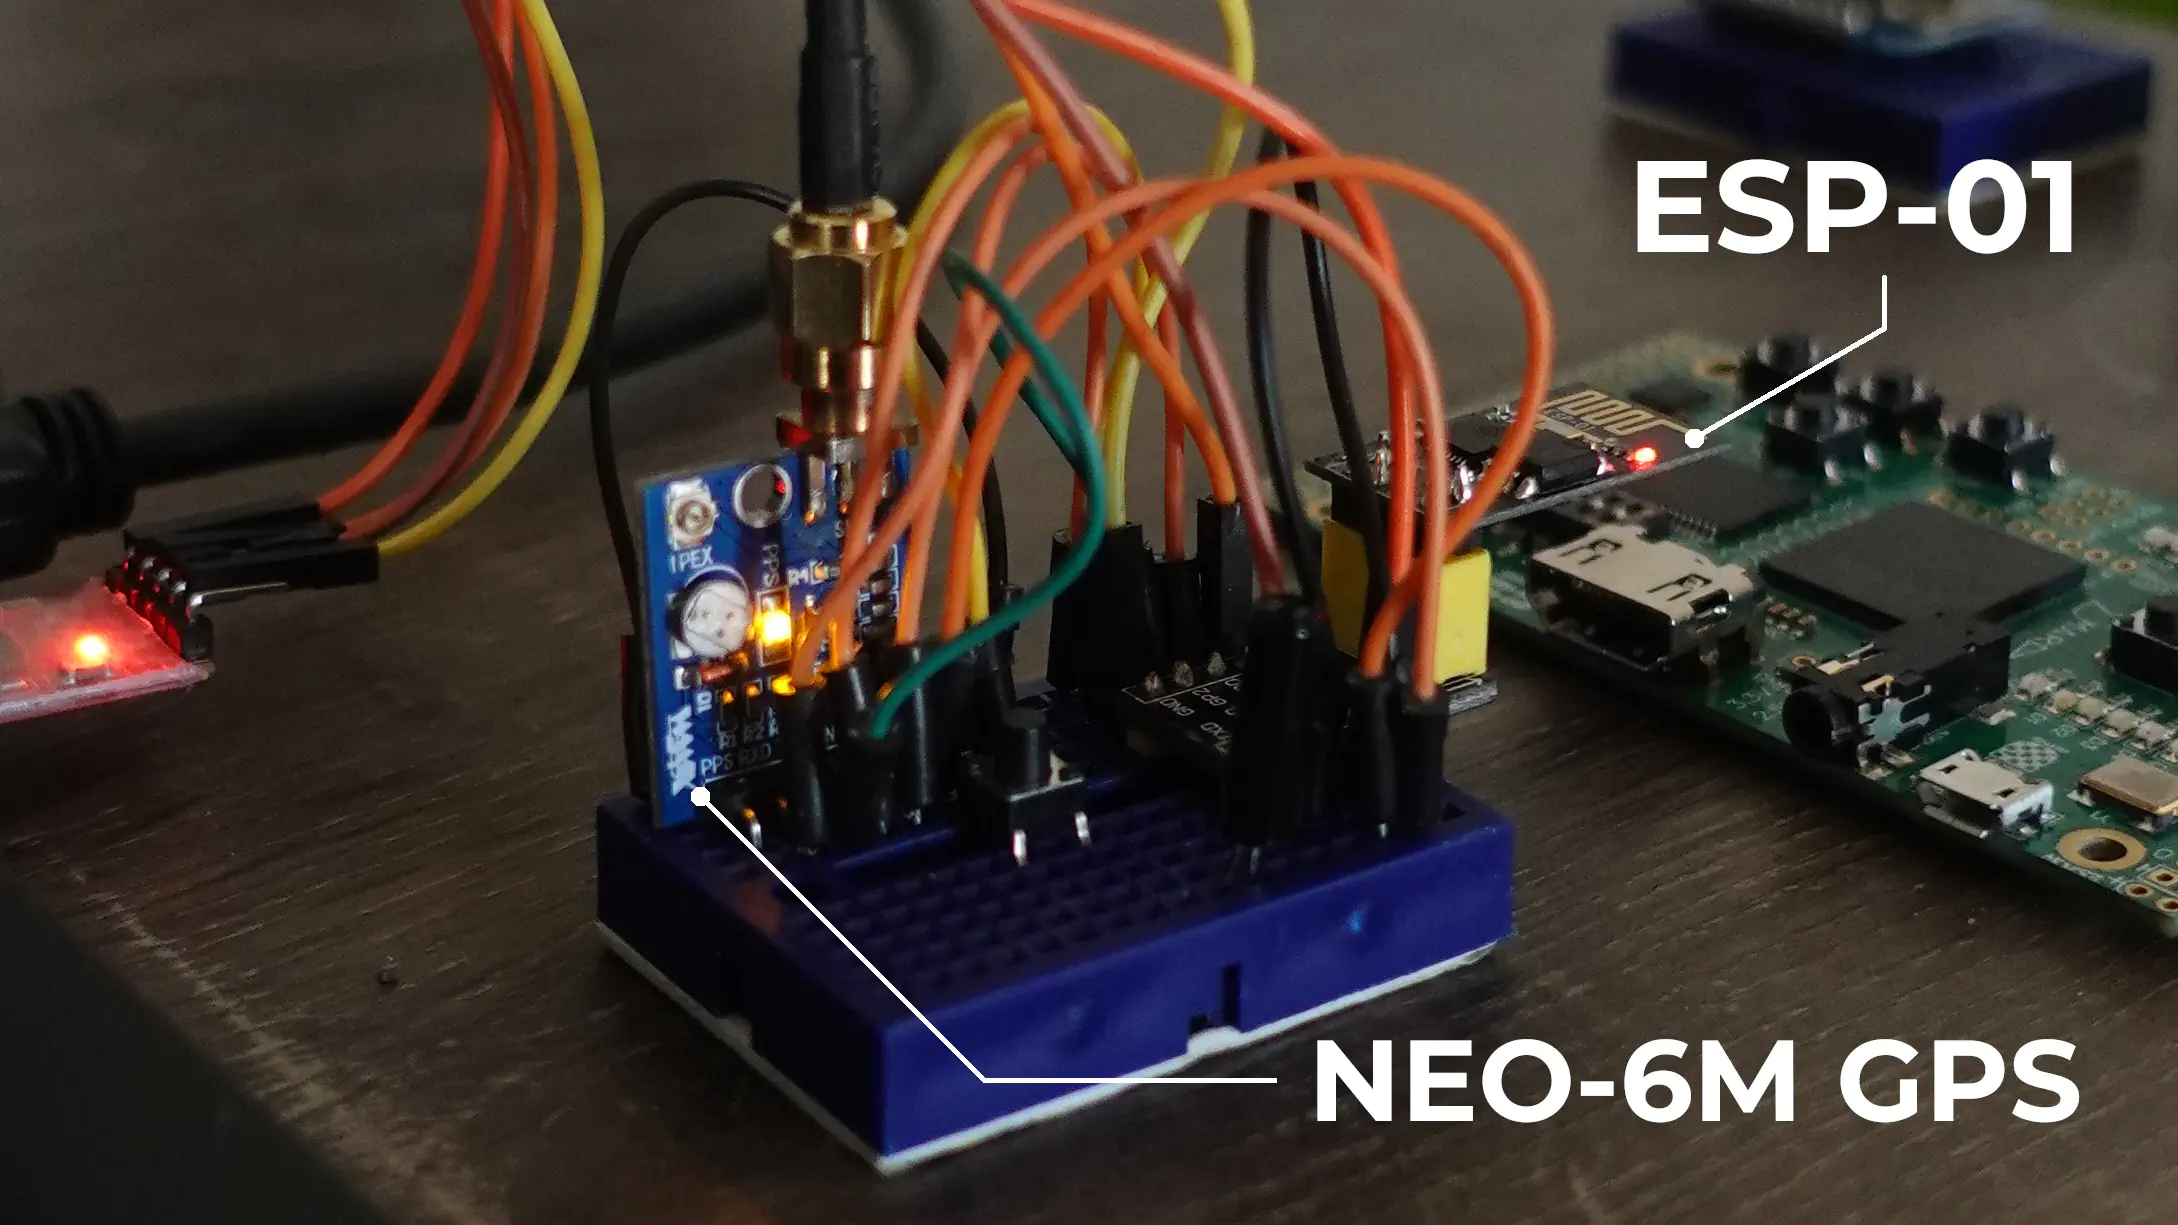 DNS DriveBy breadboard prototype with ESP8266 and NEO-6M GPS